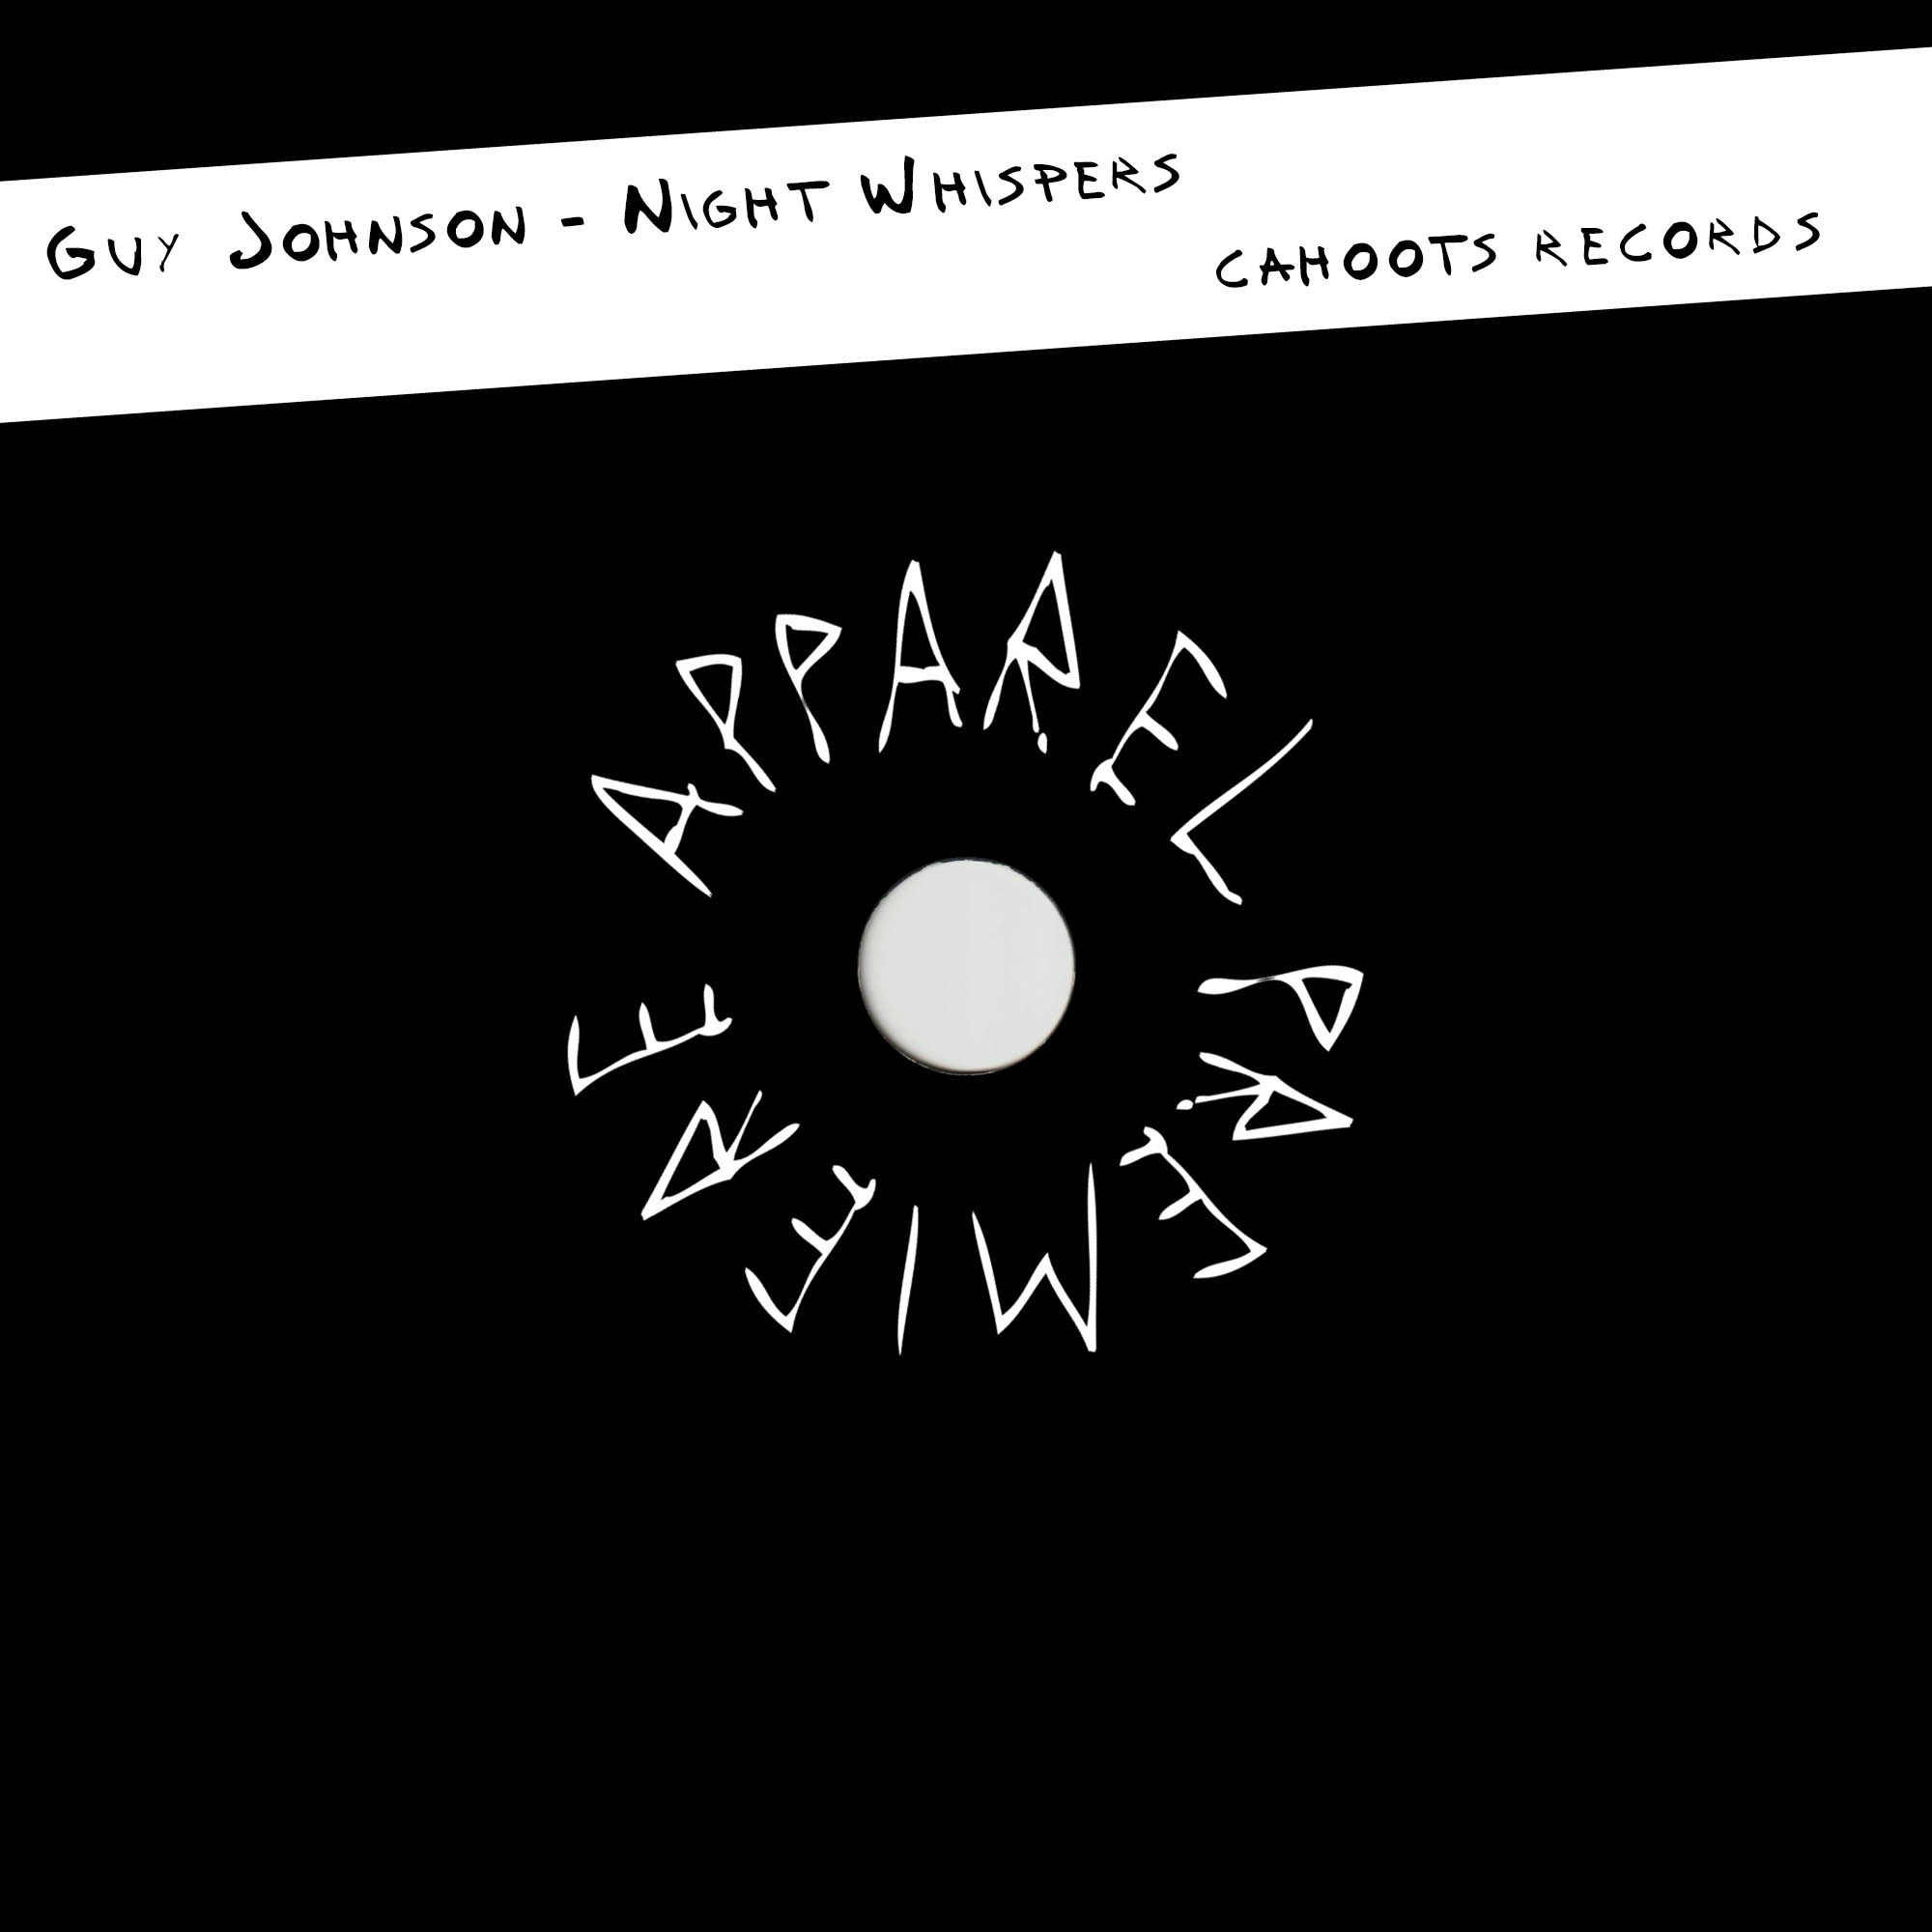 APPAREL PREMIERE Guy Johnson – Night Whispers [Cahoots Records]